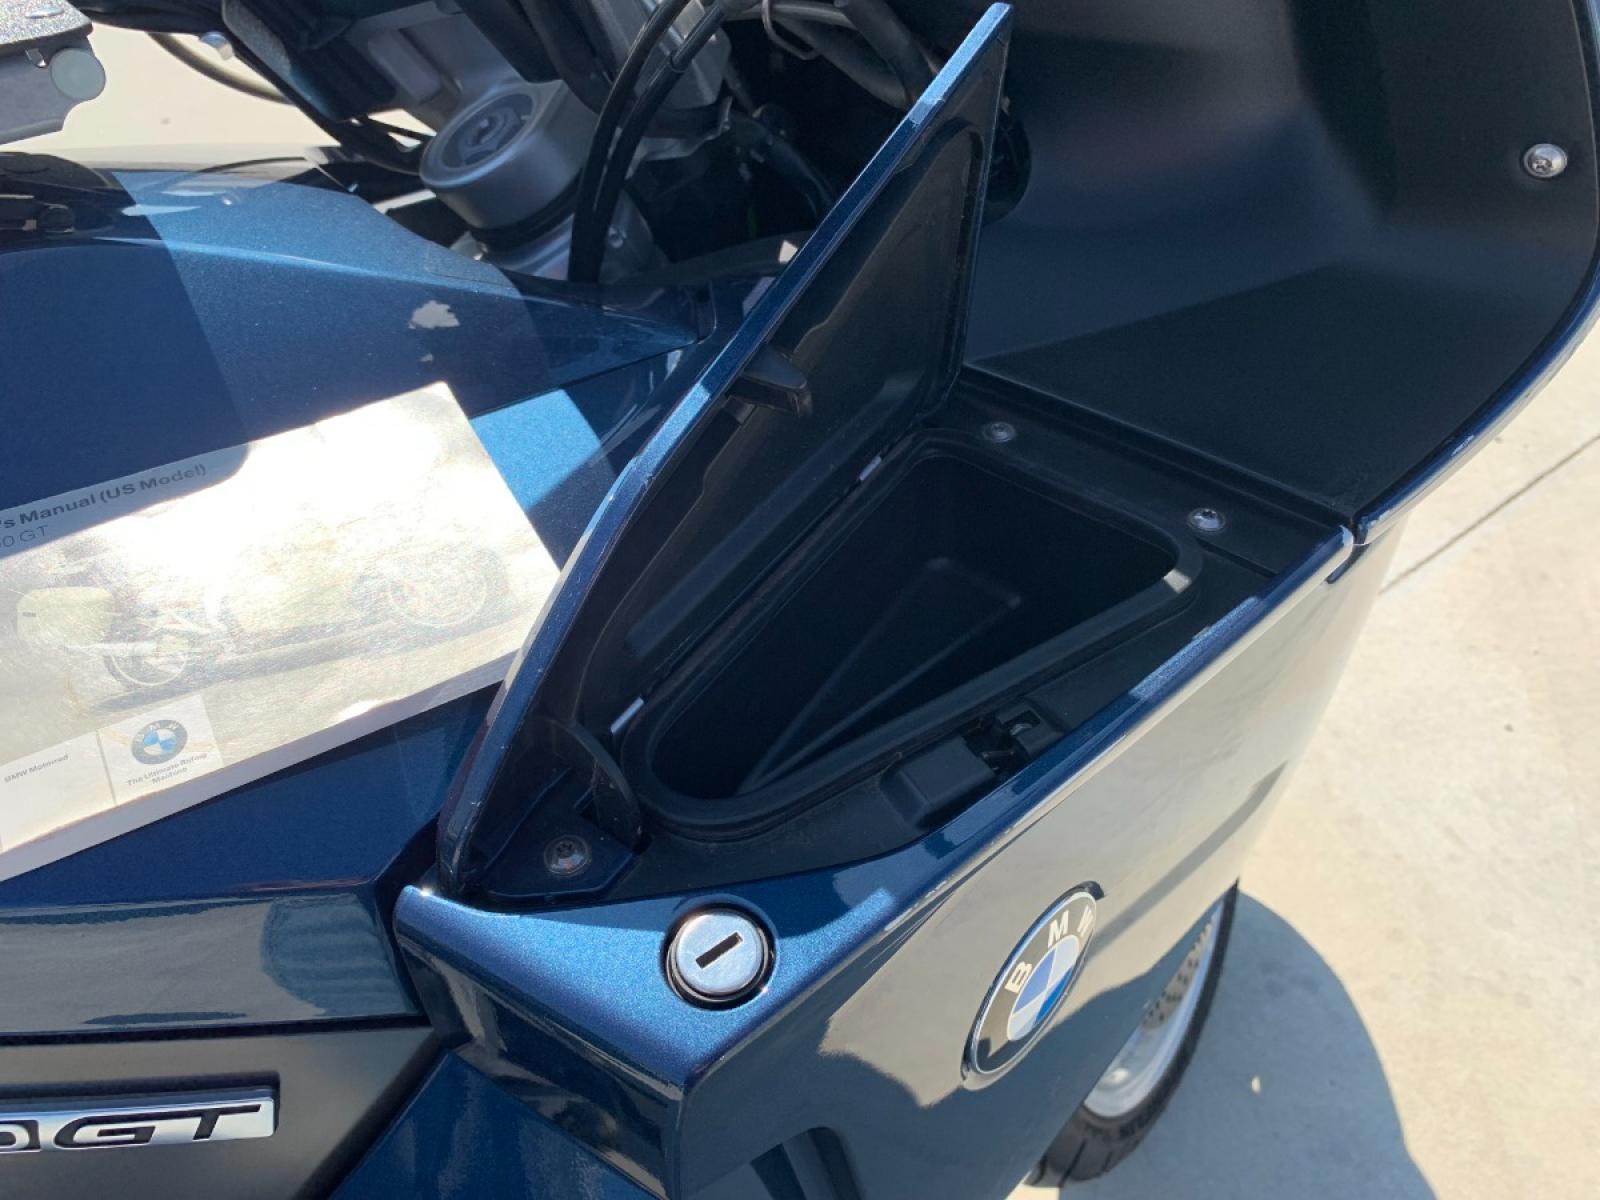 2007 BLUE BMW K1200GT K1200 (WB10597087Z) with an 1157CC engine, located at 17760 HWY 62, MORRIS, 74445, 35.609104, -95.877060 - THE 2007 BMW K1200GT IS A SPORT-TOURING MOTORCYCLE MADE BY BMW. THE SECOND GENERATION K1200GT, INTRODUCED IN 2006, USES ESSENTULY THE SAME INLINE-4 ENGINE AS THE BMW K1200S SPORTSBIKE, WHICH HELD THE WORLD SPEED RECORD IN 2005 FOR ITS CLASS AT 279.33 km/h (173.57 mph), AND THE K1200R. THE NEW MODEL - Photo #12